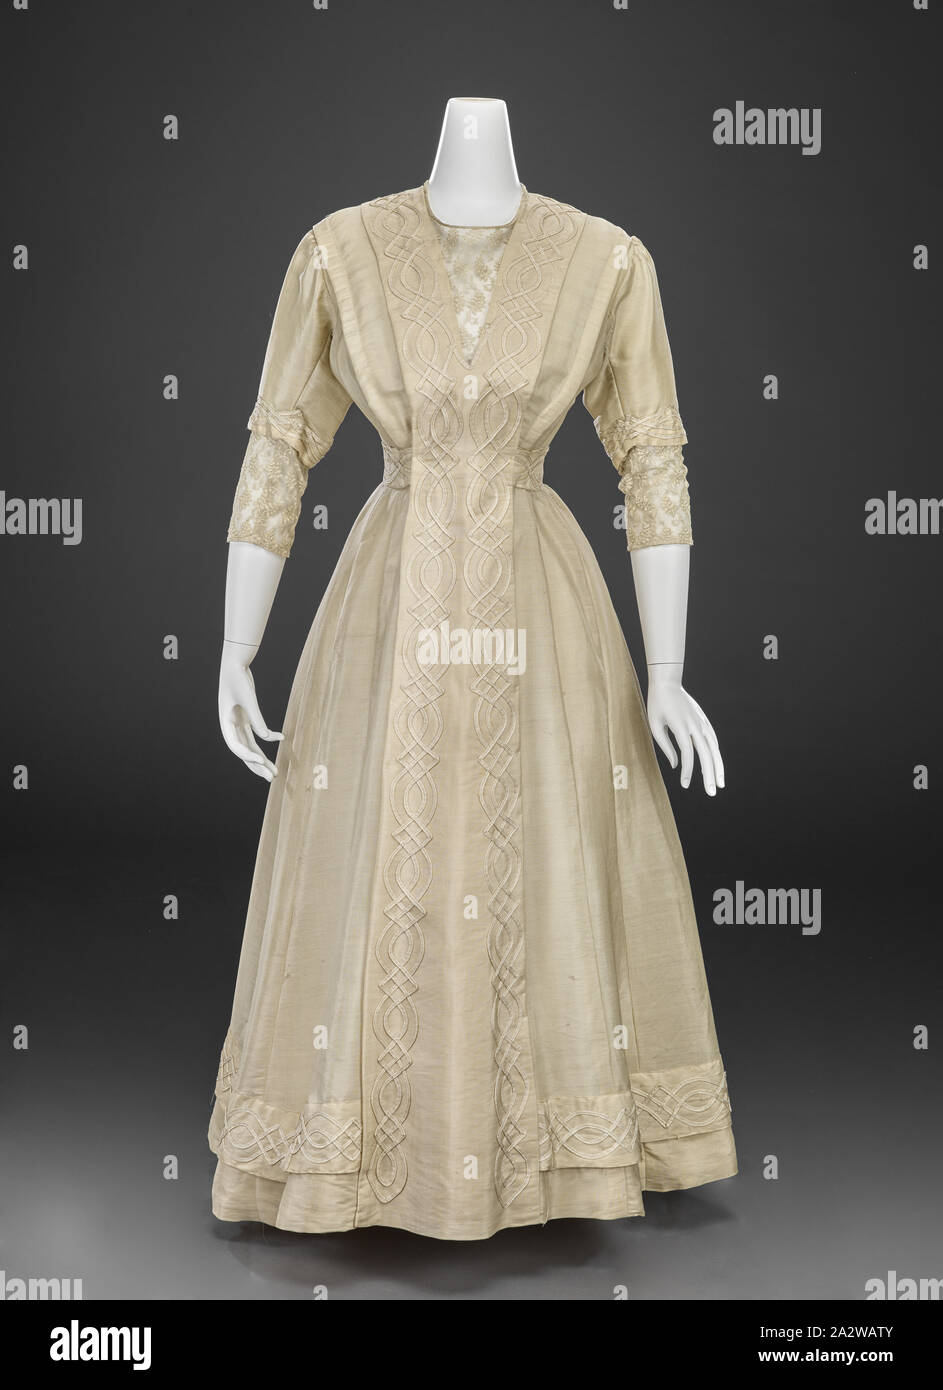 dress, Unknown, 1910-1915, silk, mohair, braid, lace, center back 48 in., center front 46-1/2 in., bust 32 in., waist 27 in., hips 32 in., sleeve length 16 in., shoulders 16 in., American, Textile and Fashion Arts Stock Photo